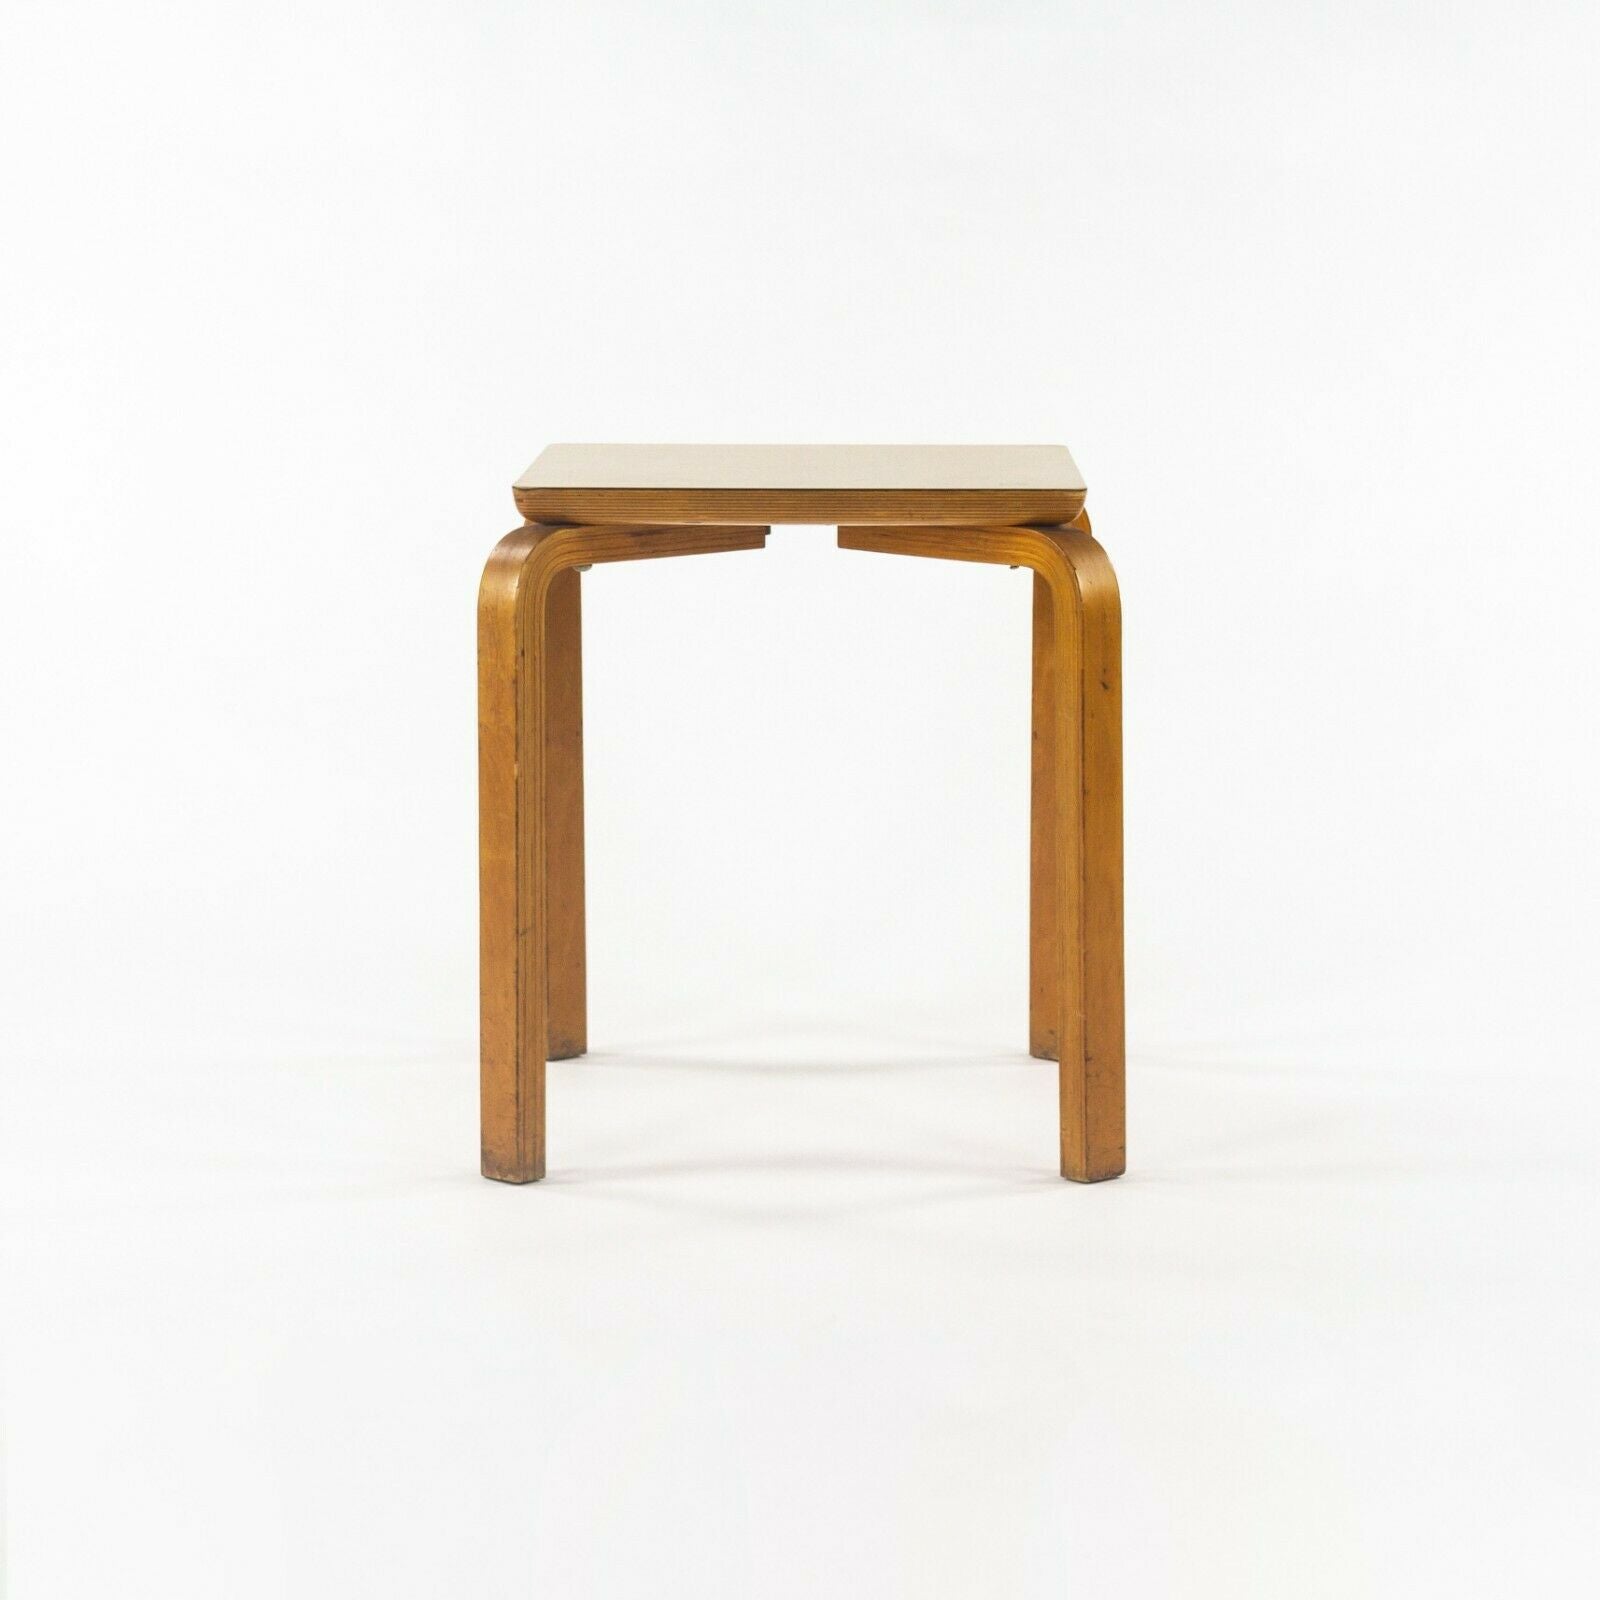 1950s Thonet Bent Birch Wood and Wood Grain Square Laminate Side / End Table